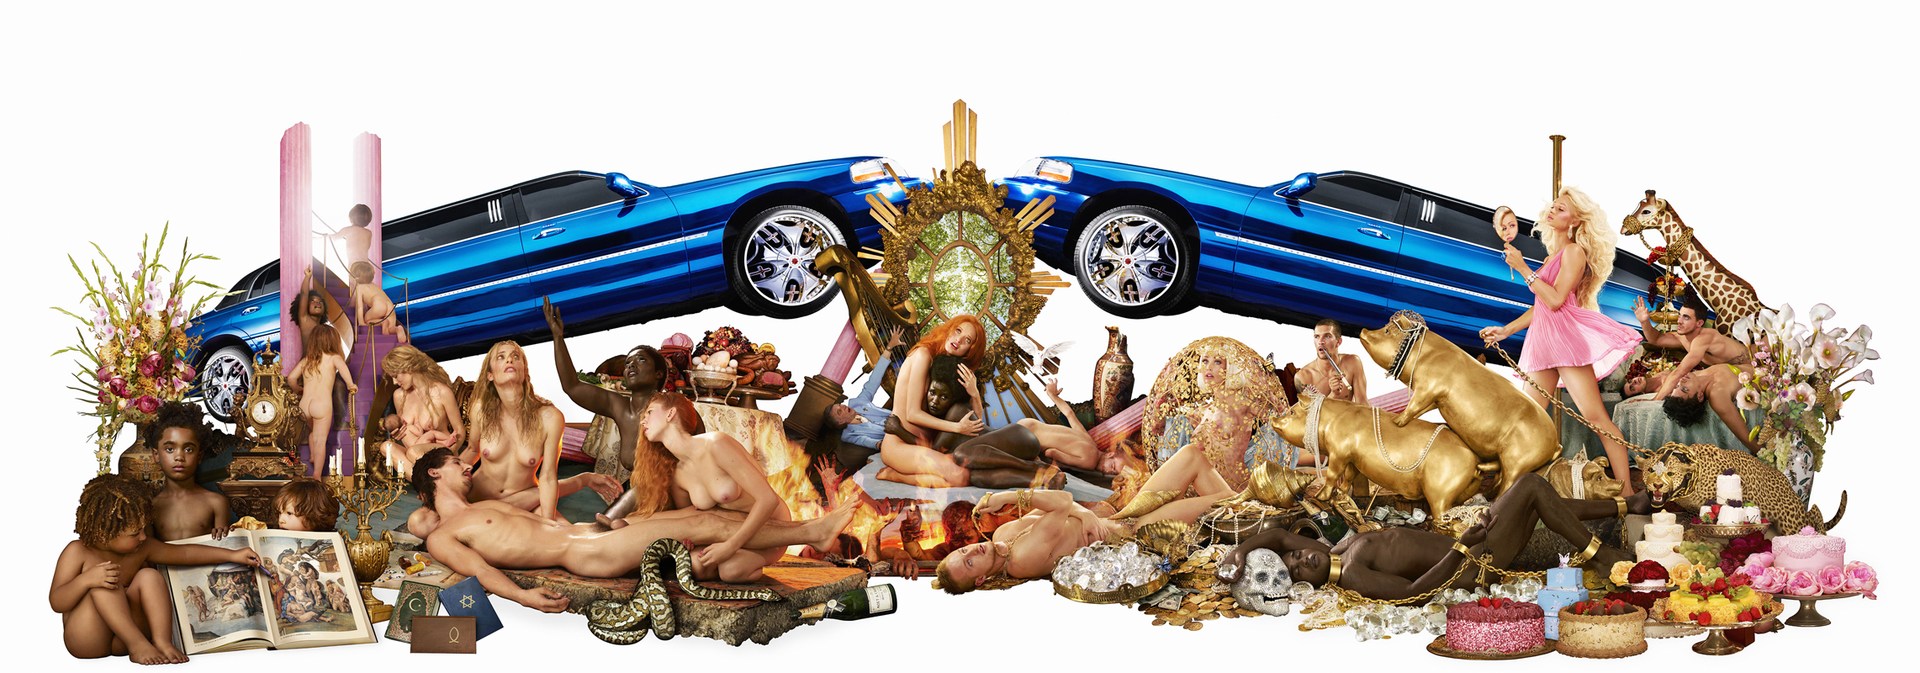 David LaChapelle | Selected Works | Decadence - in cooperation with Fred Torres Collaborations | 40